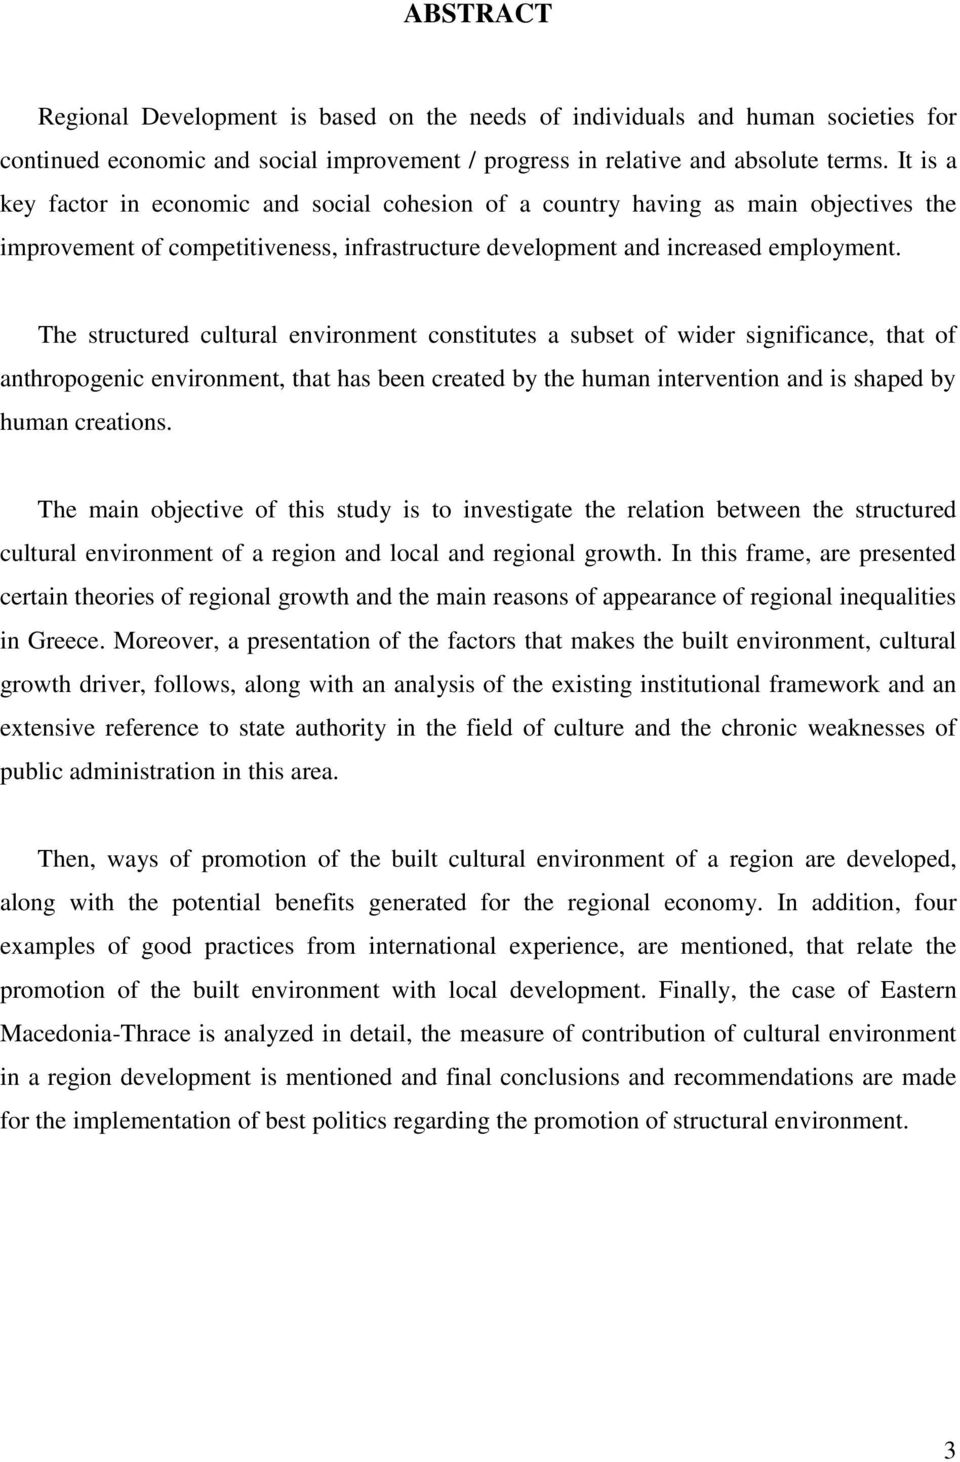 The structured cultural environment constitutes a subset of wider significance, that of anthropogenic environment, that has been created by the human intervention and is shaped by human creations.